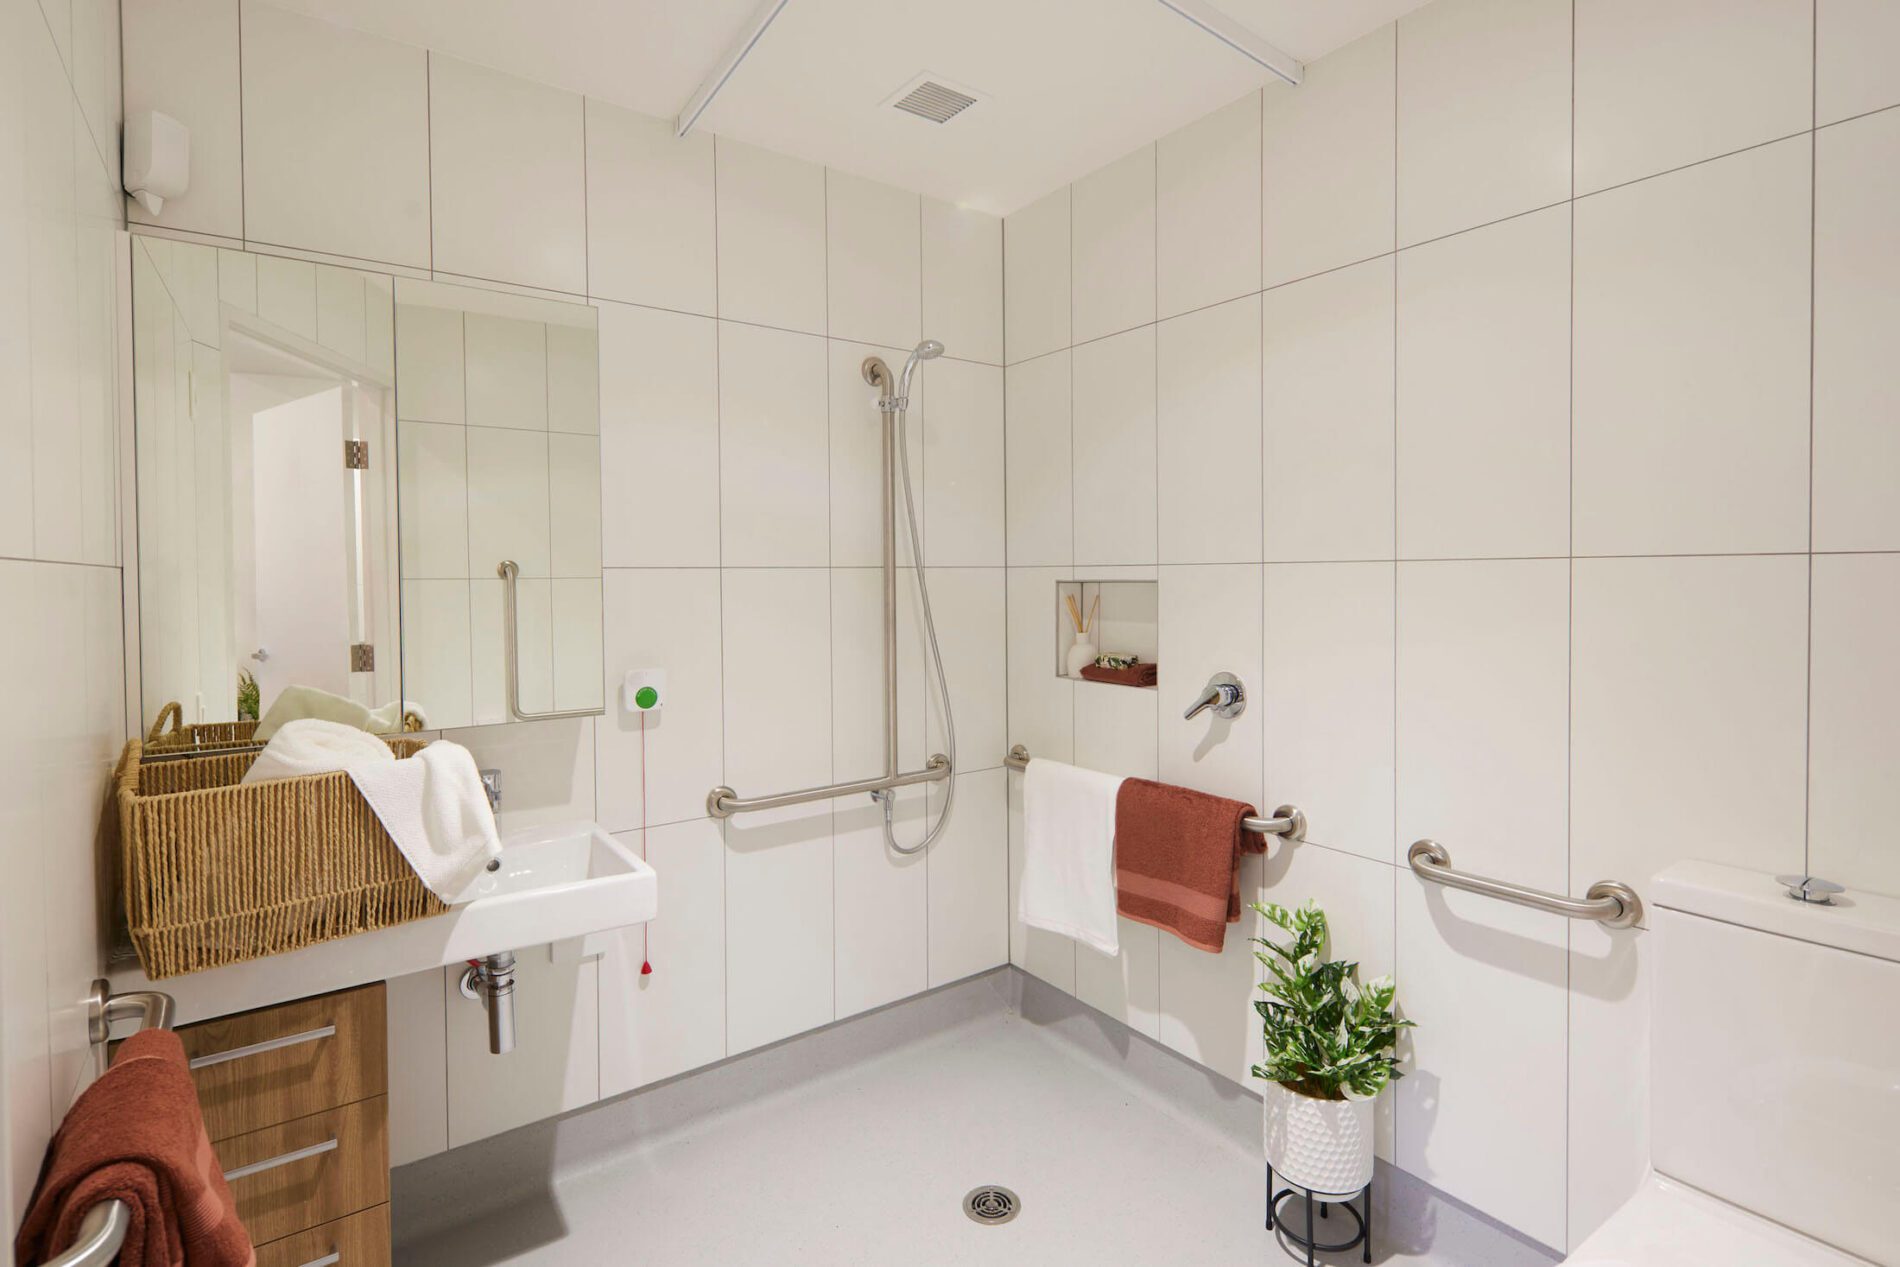 Large format white tiled bathroom with accessible shower and handrails, timber veneer drawers and linen basket